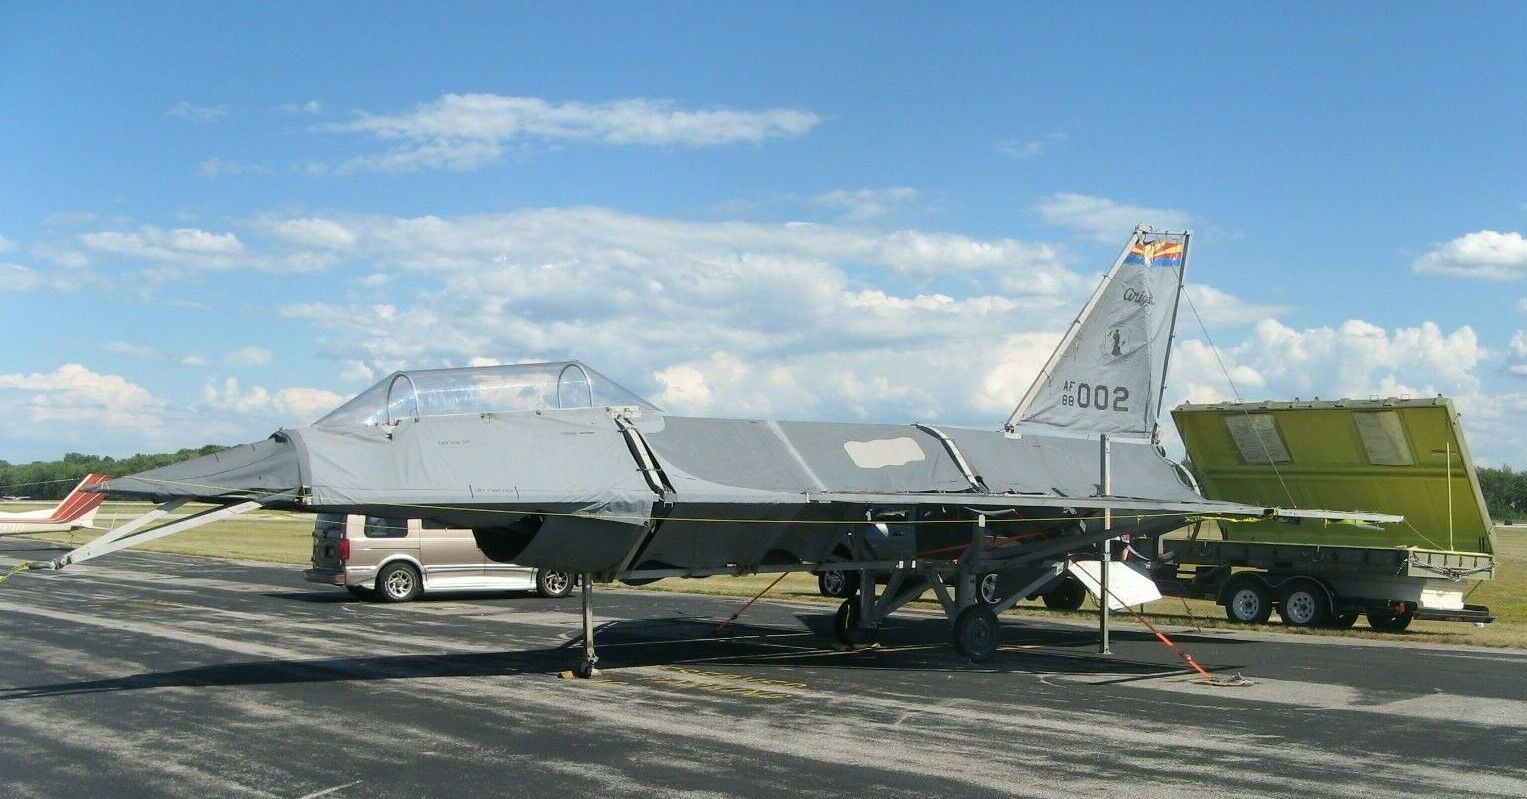 USAF F-16 PROTOTYPE GROUND DECOY FROM THE US AIR FORCE MUSEUM